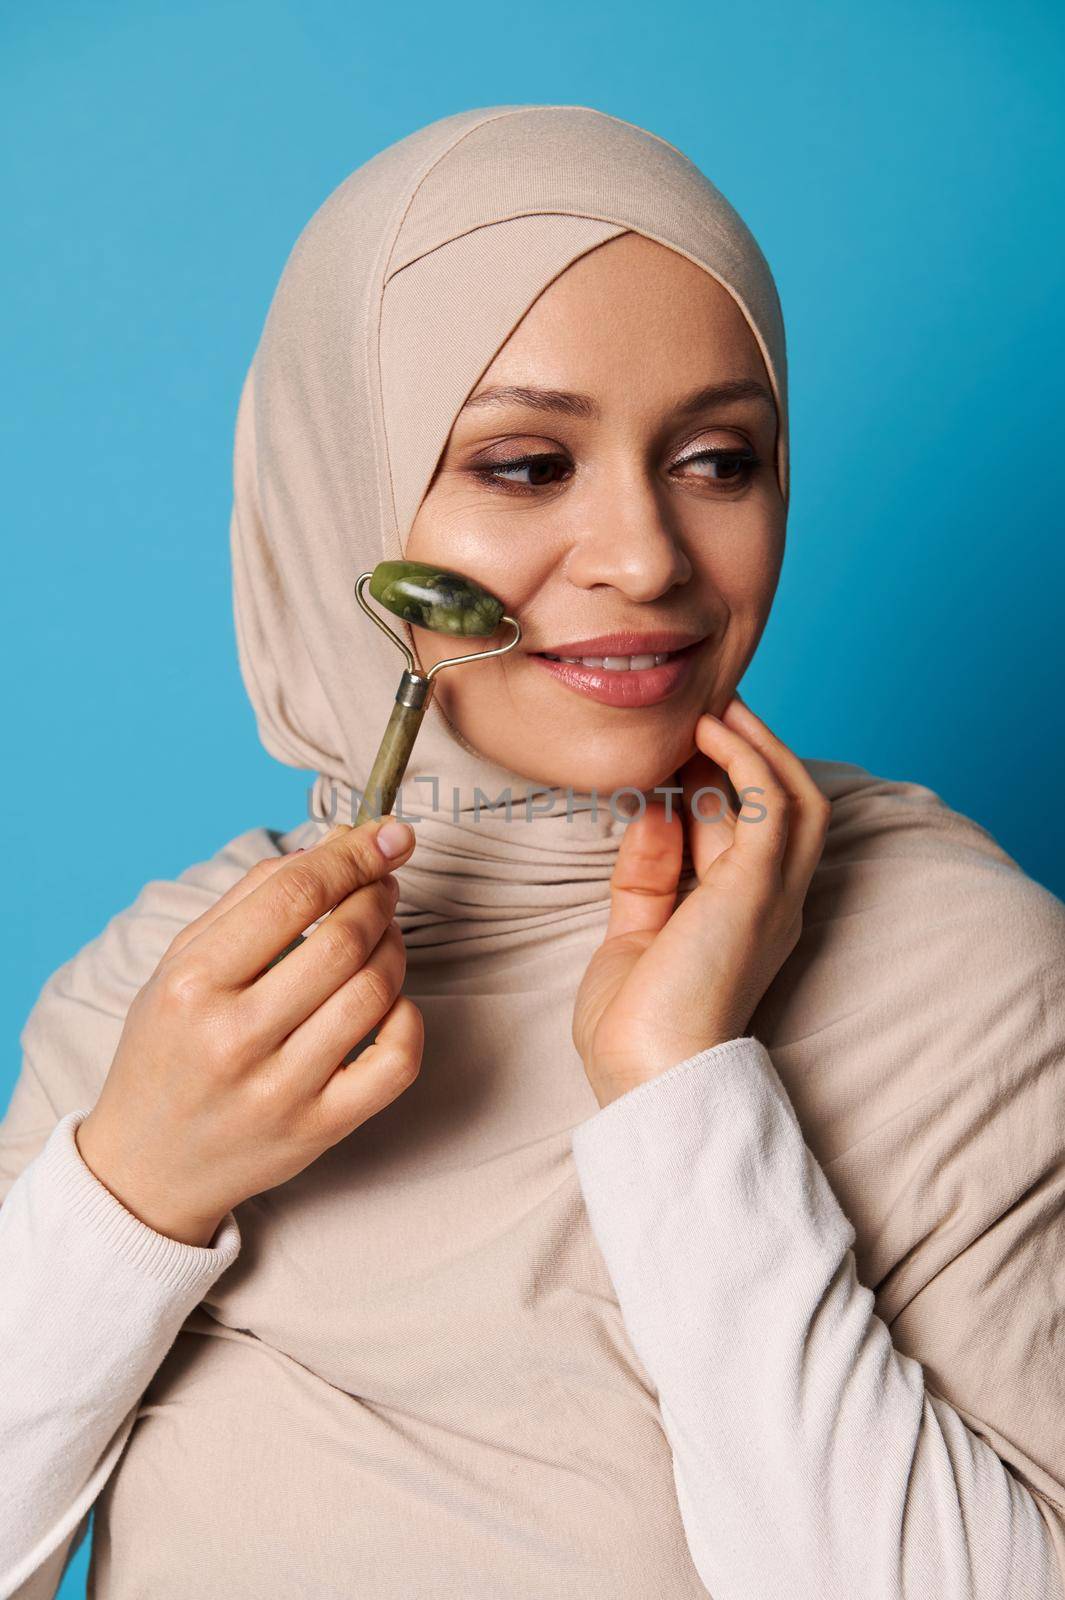 Face beauty portrait of an attractive Arabian woman in hijab and strict religious outfit using jade roller for face lymphatic drainage by artgf